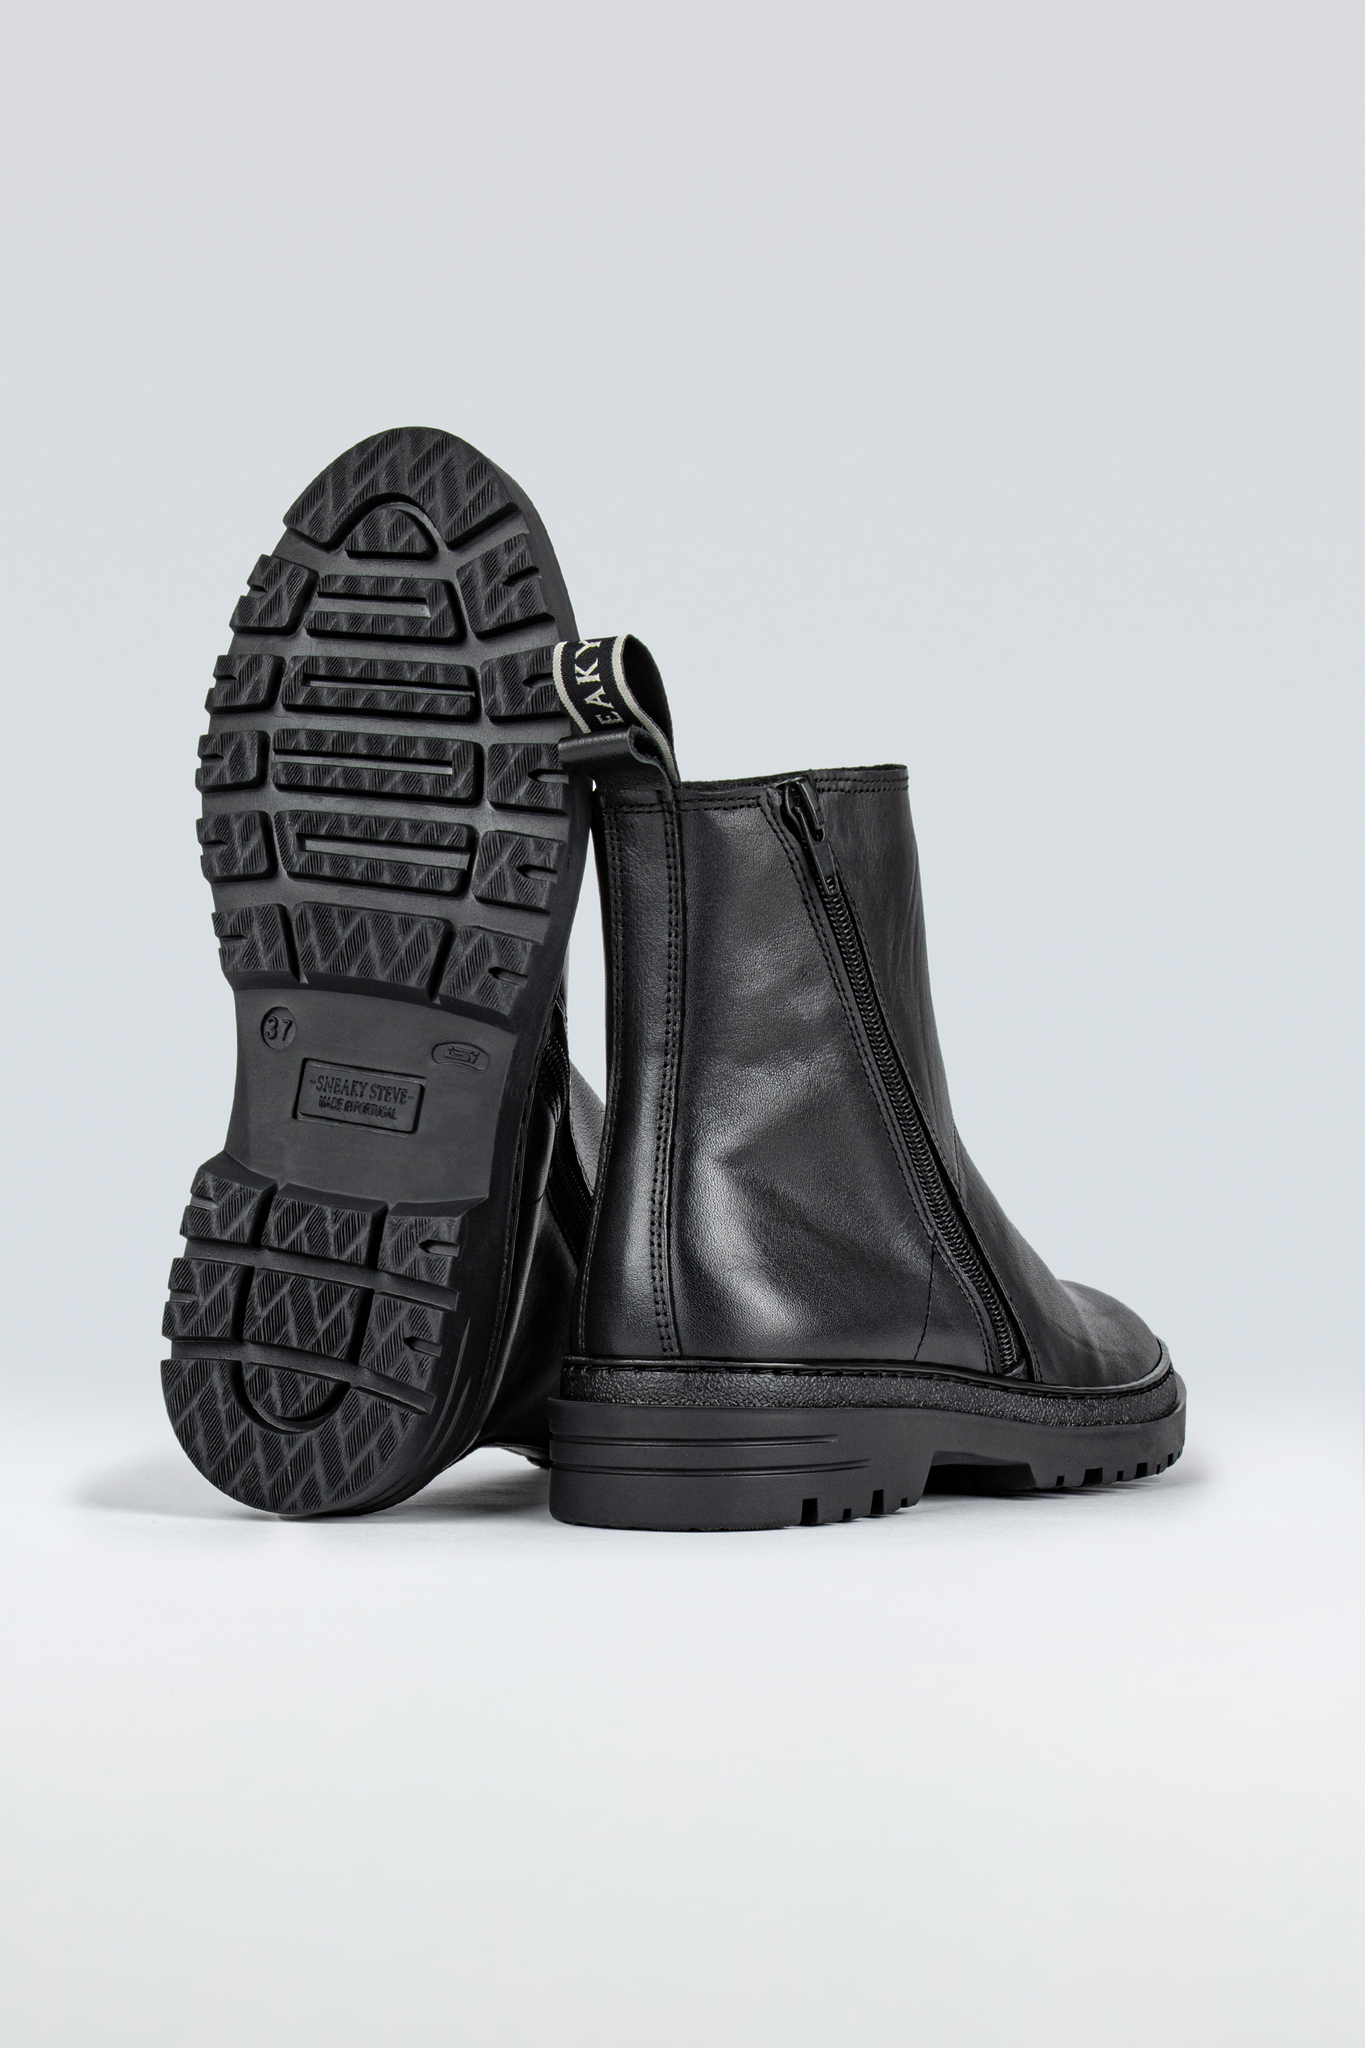 Carry W boots från Sneaky Steave Black